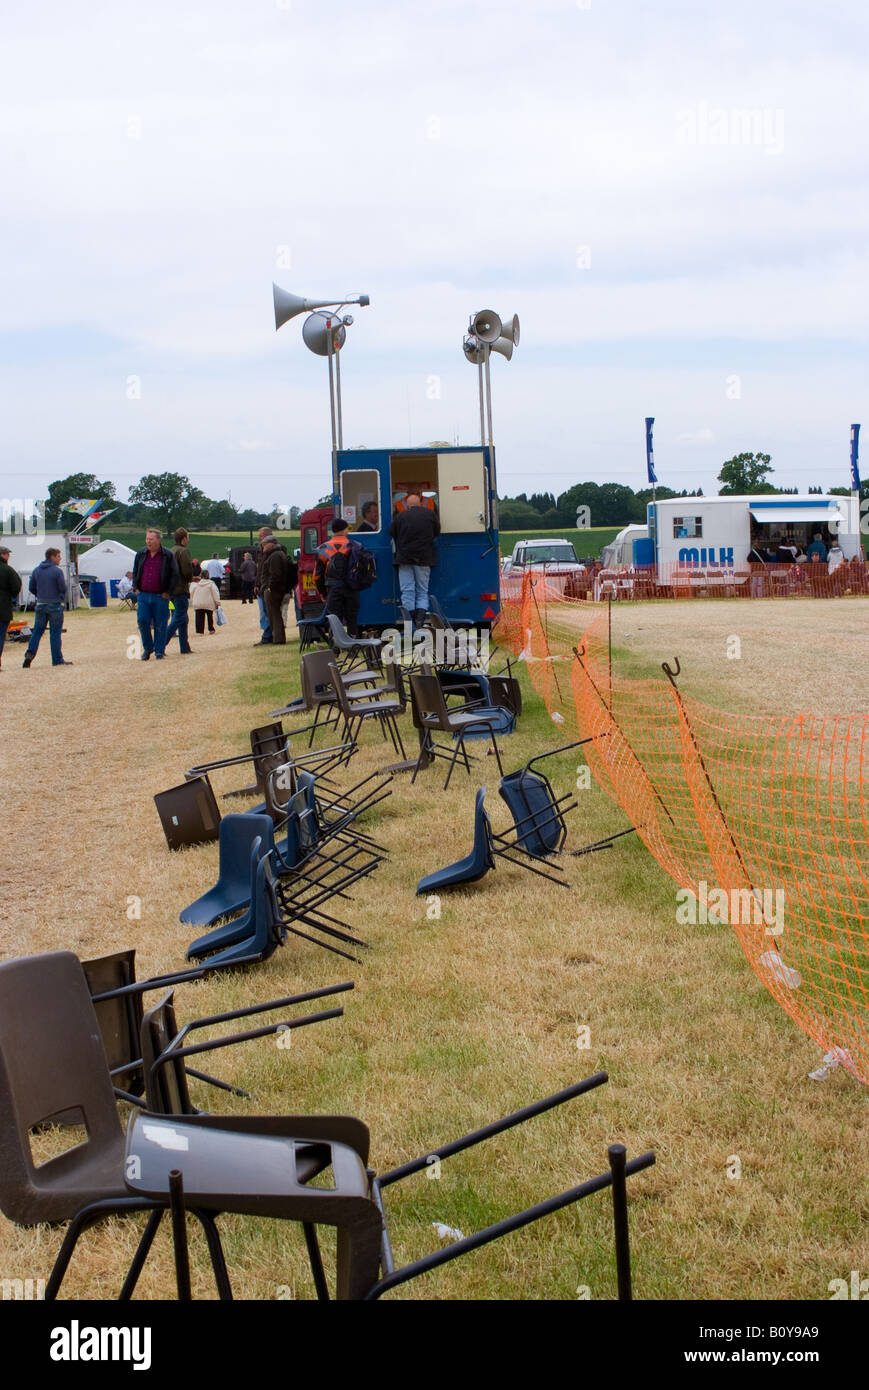 Empty Upturned Chairs and Loudspeaker Commentary Box by Parade Ring at Smallwood Vintage Rally Cheshire England United Kingdom Stock Photo